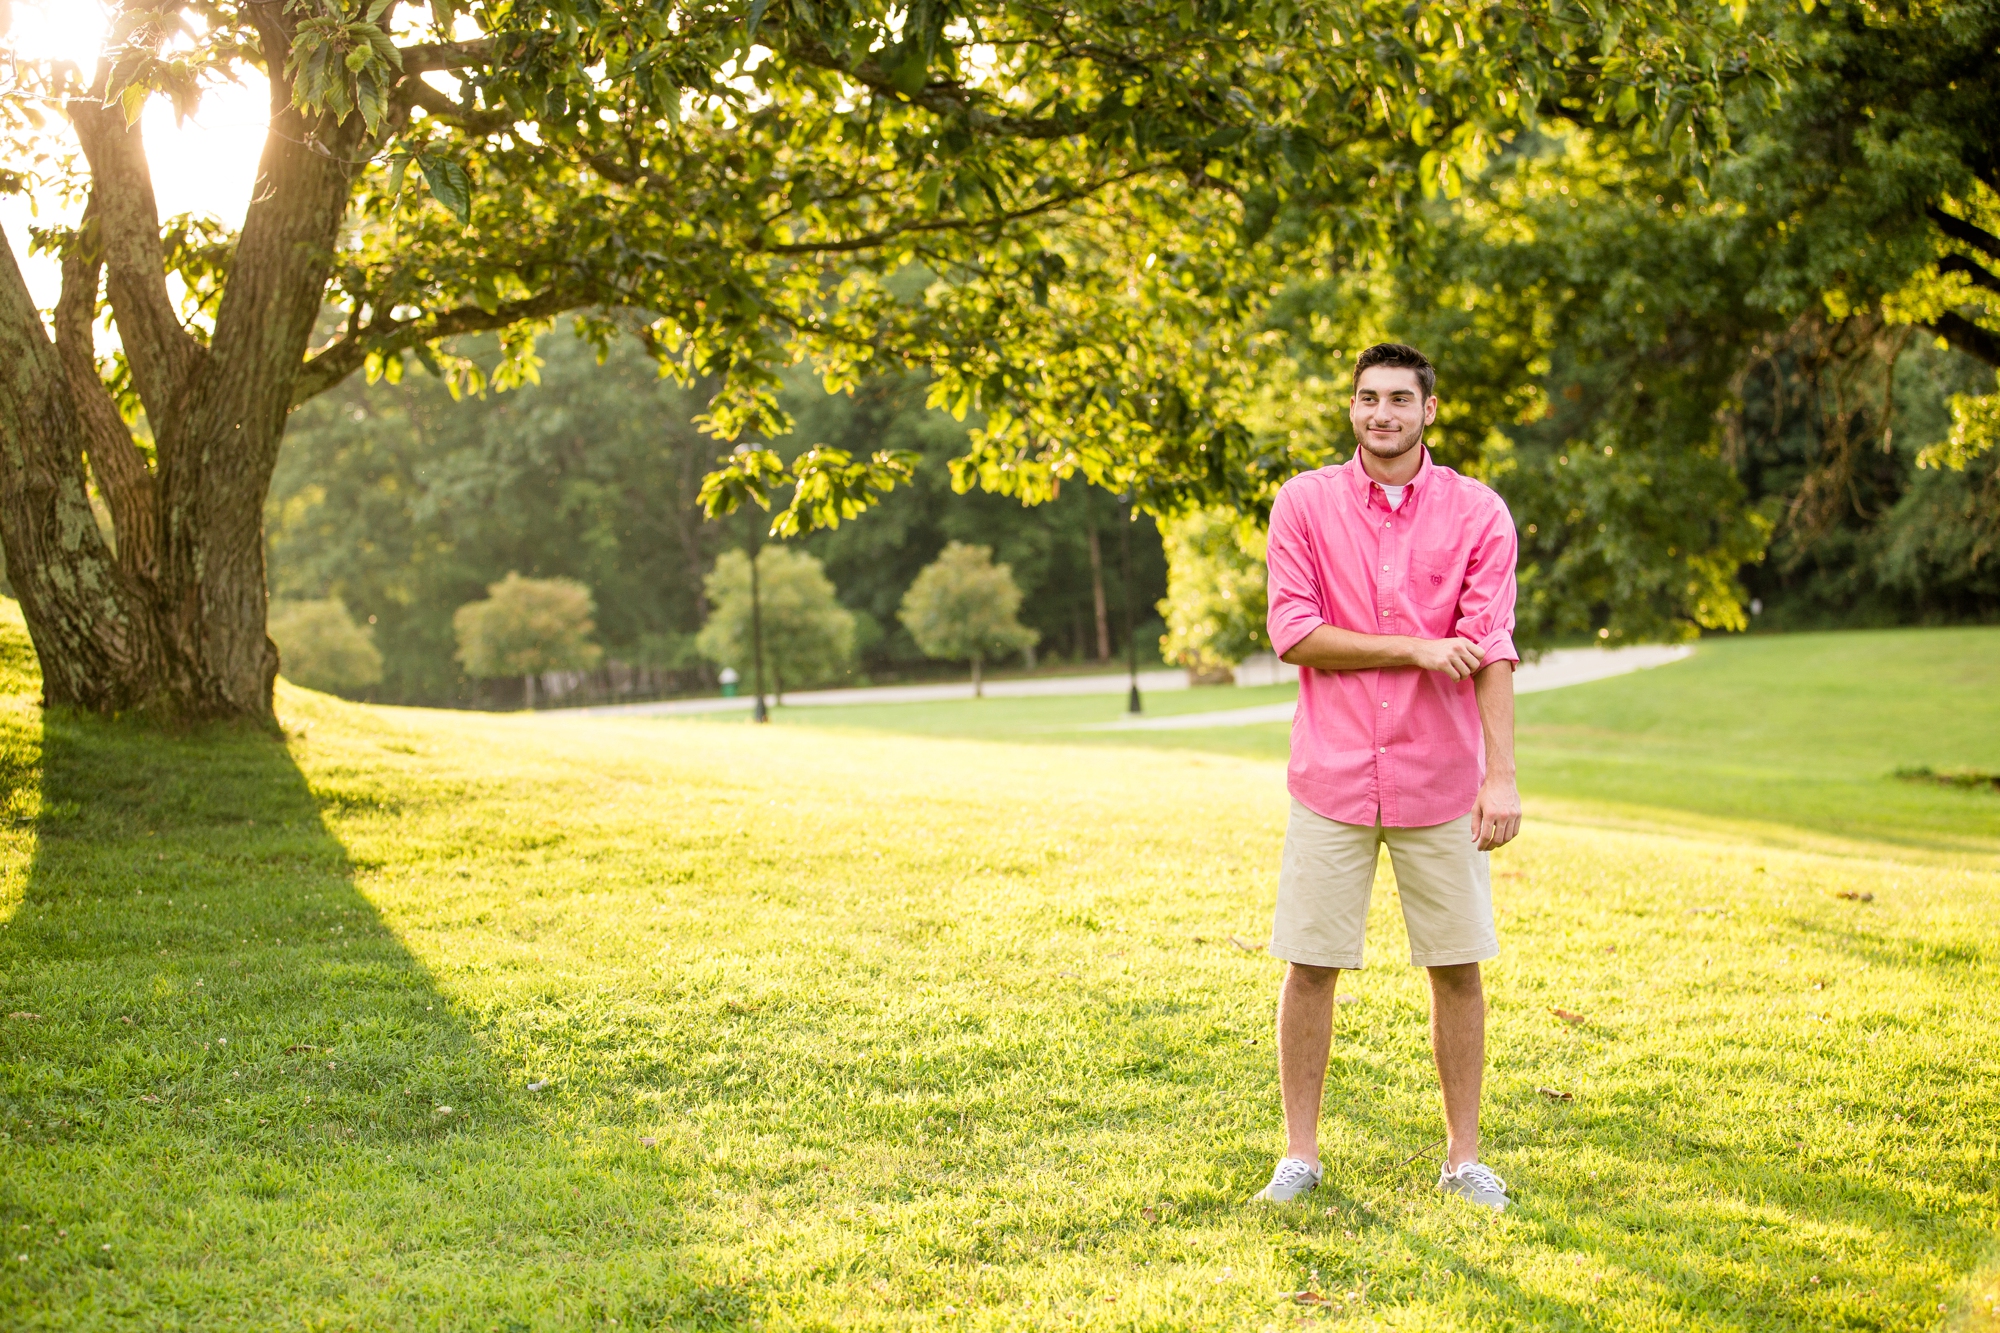 places to take senior pictures in pittsburgh, hartwood acres senior photos, pittsburgh senior photographer, best places to take senior pictures in pittsburgh